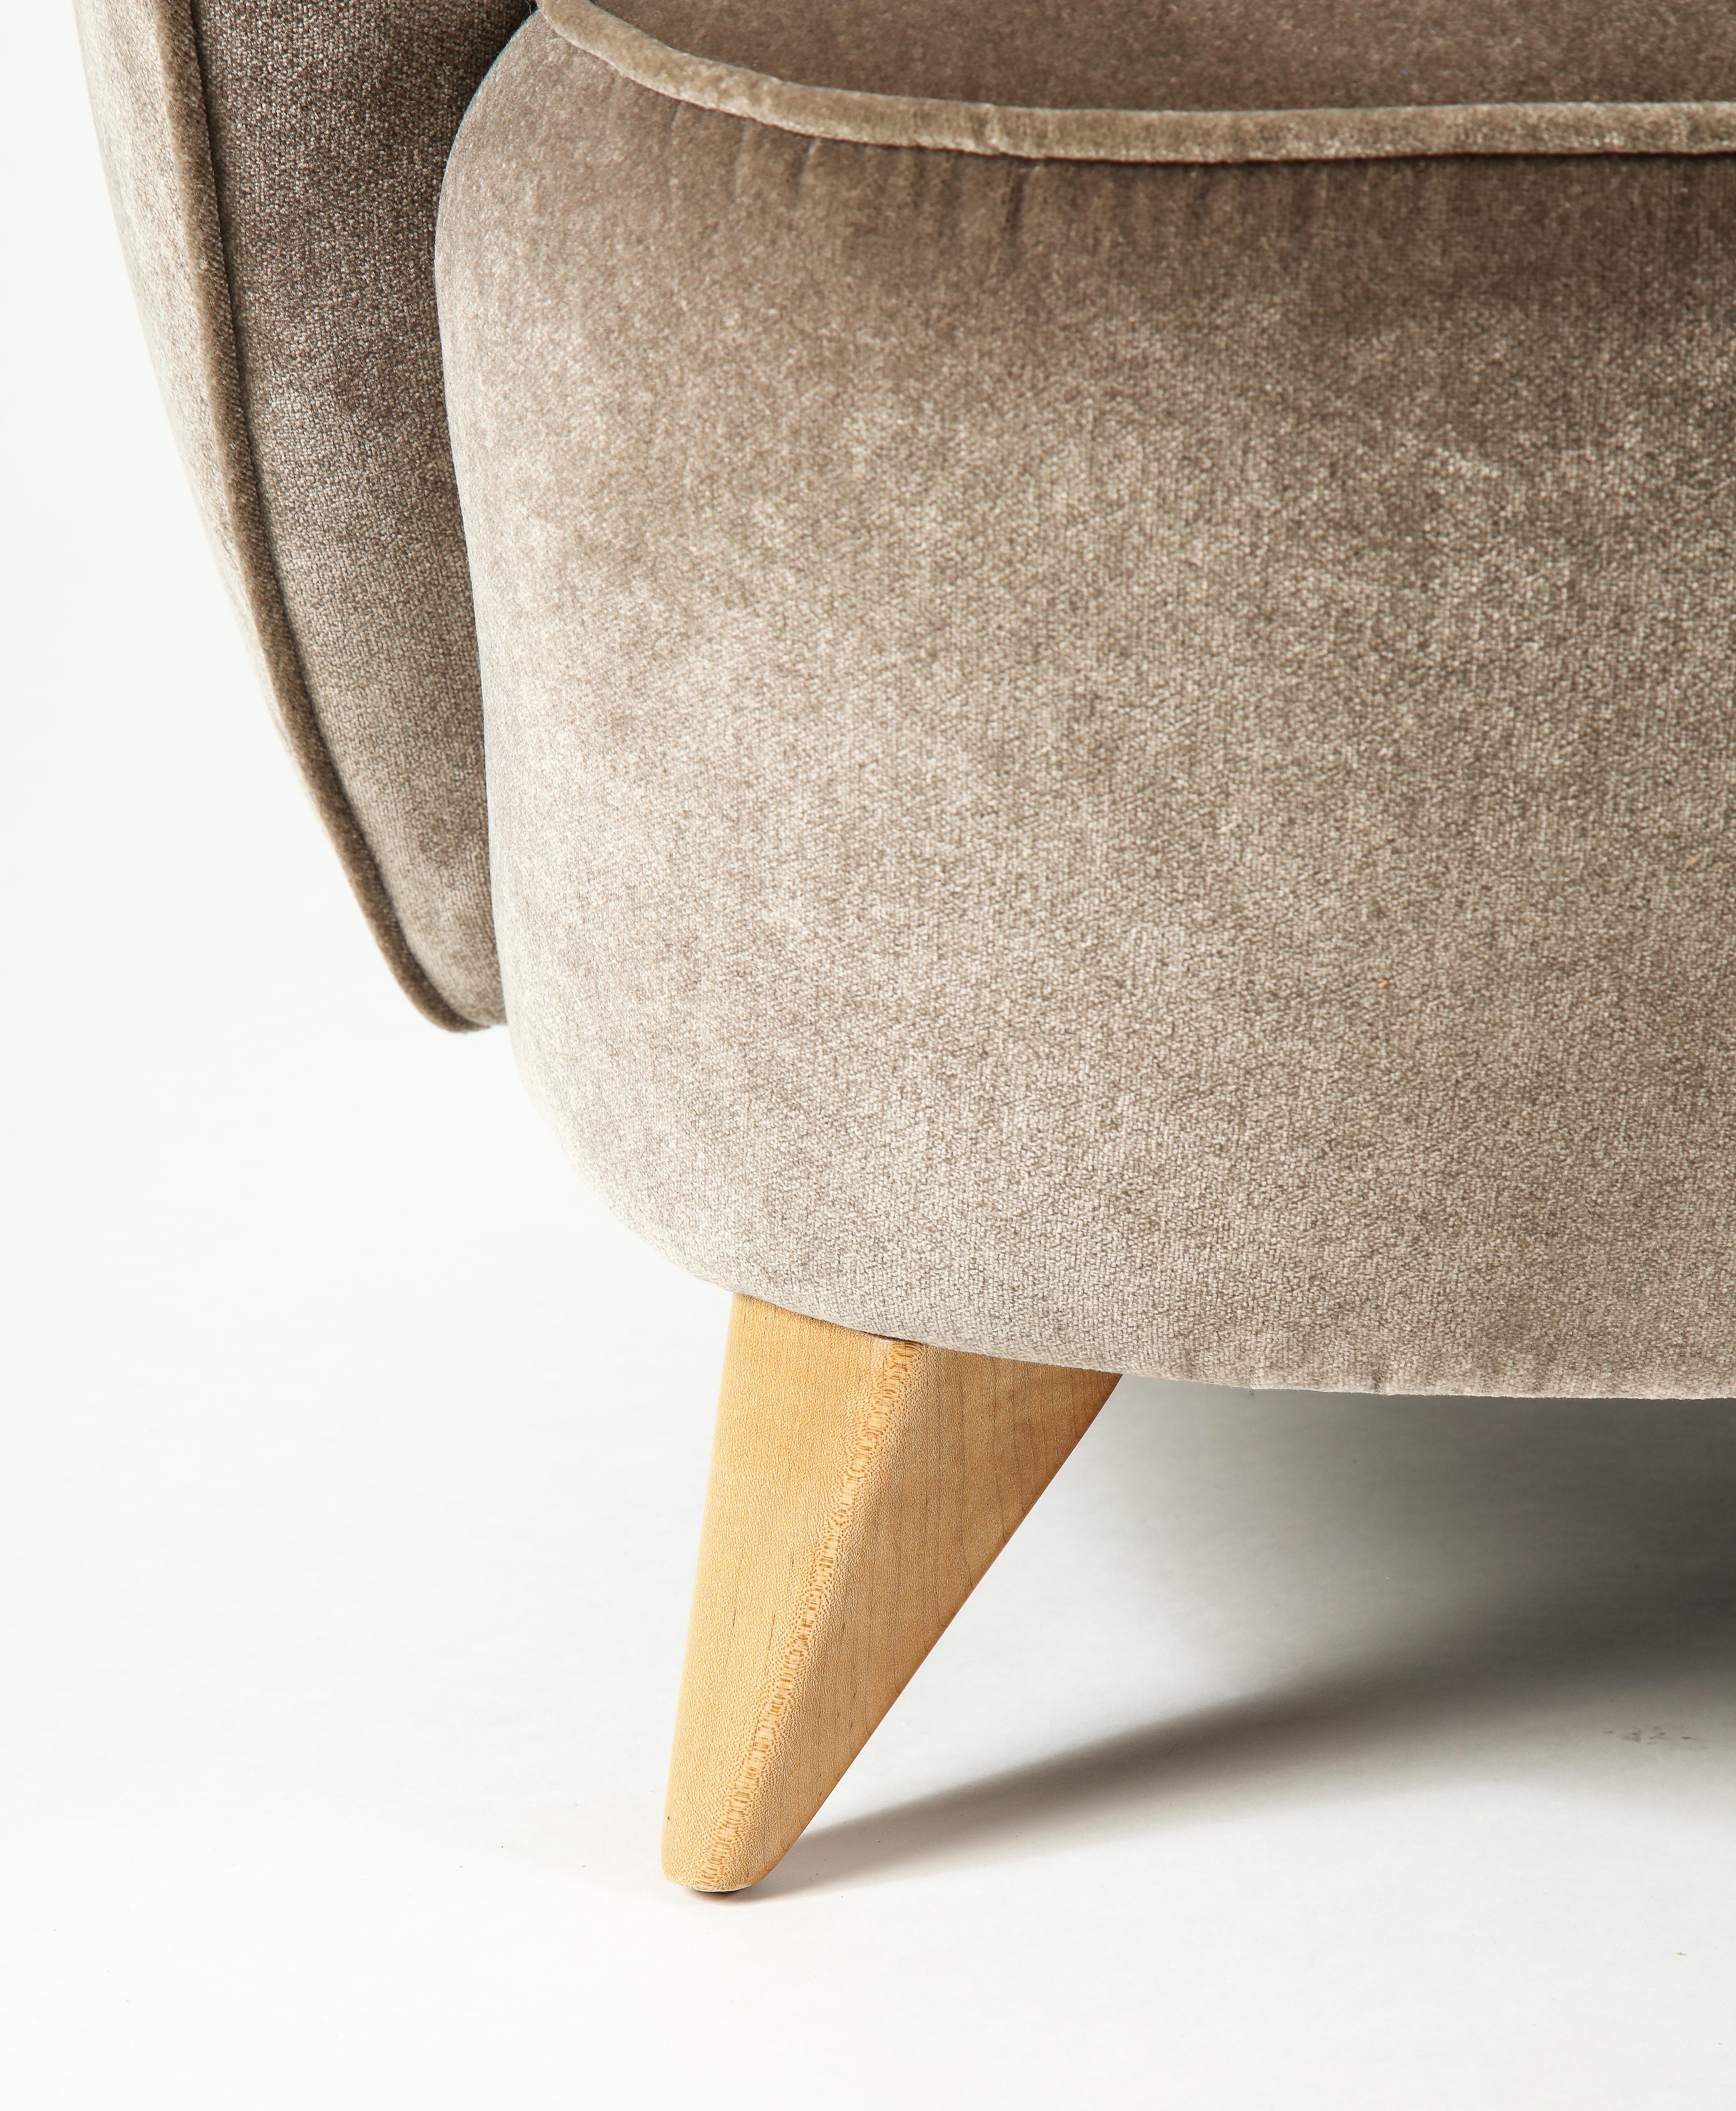 Vladimir Kagan Barrel Chair in Beige Upholstery with Natural Maple Base 3